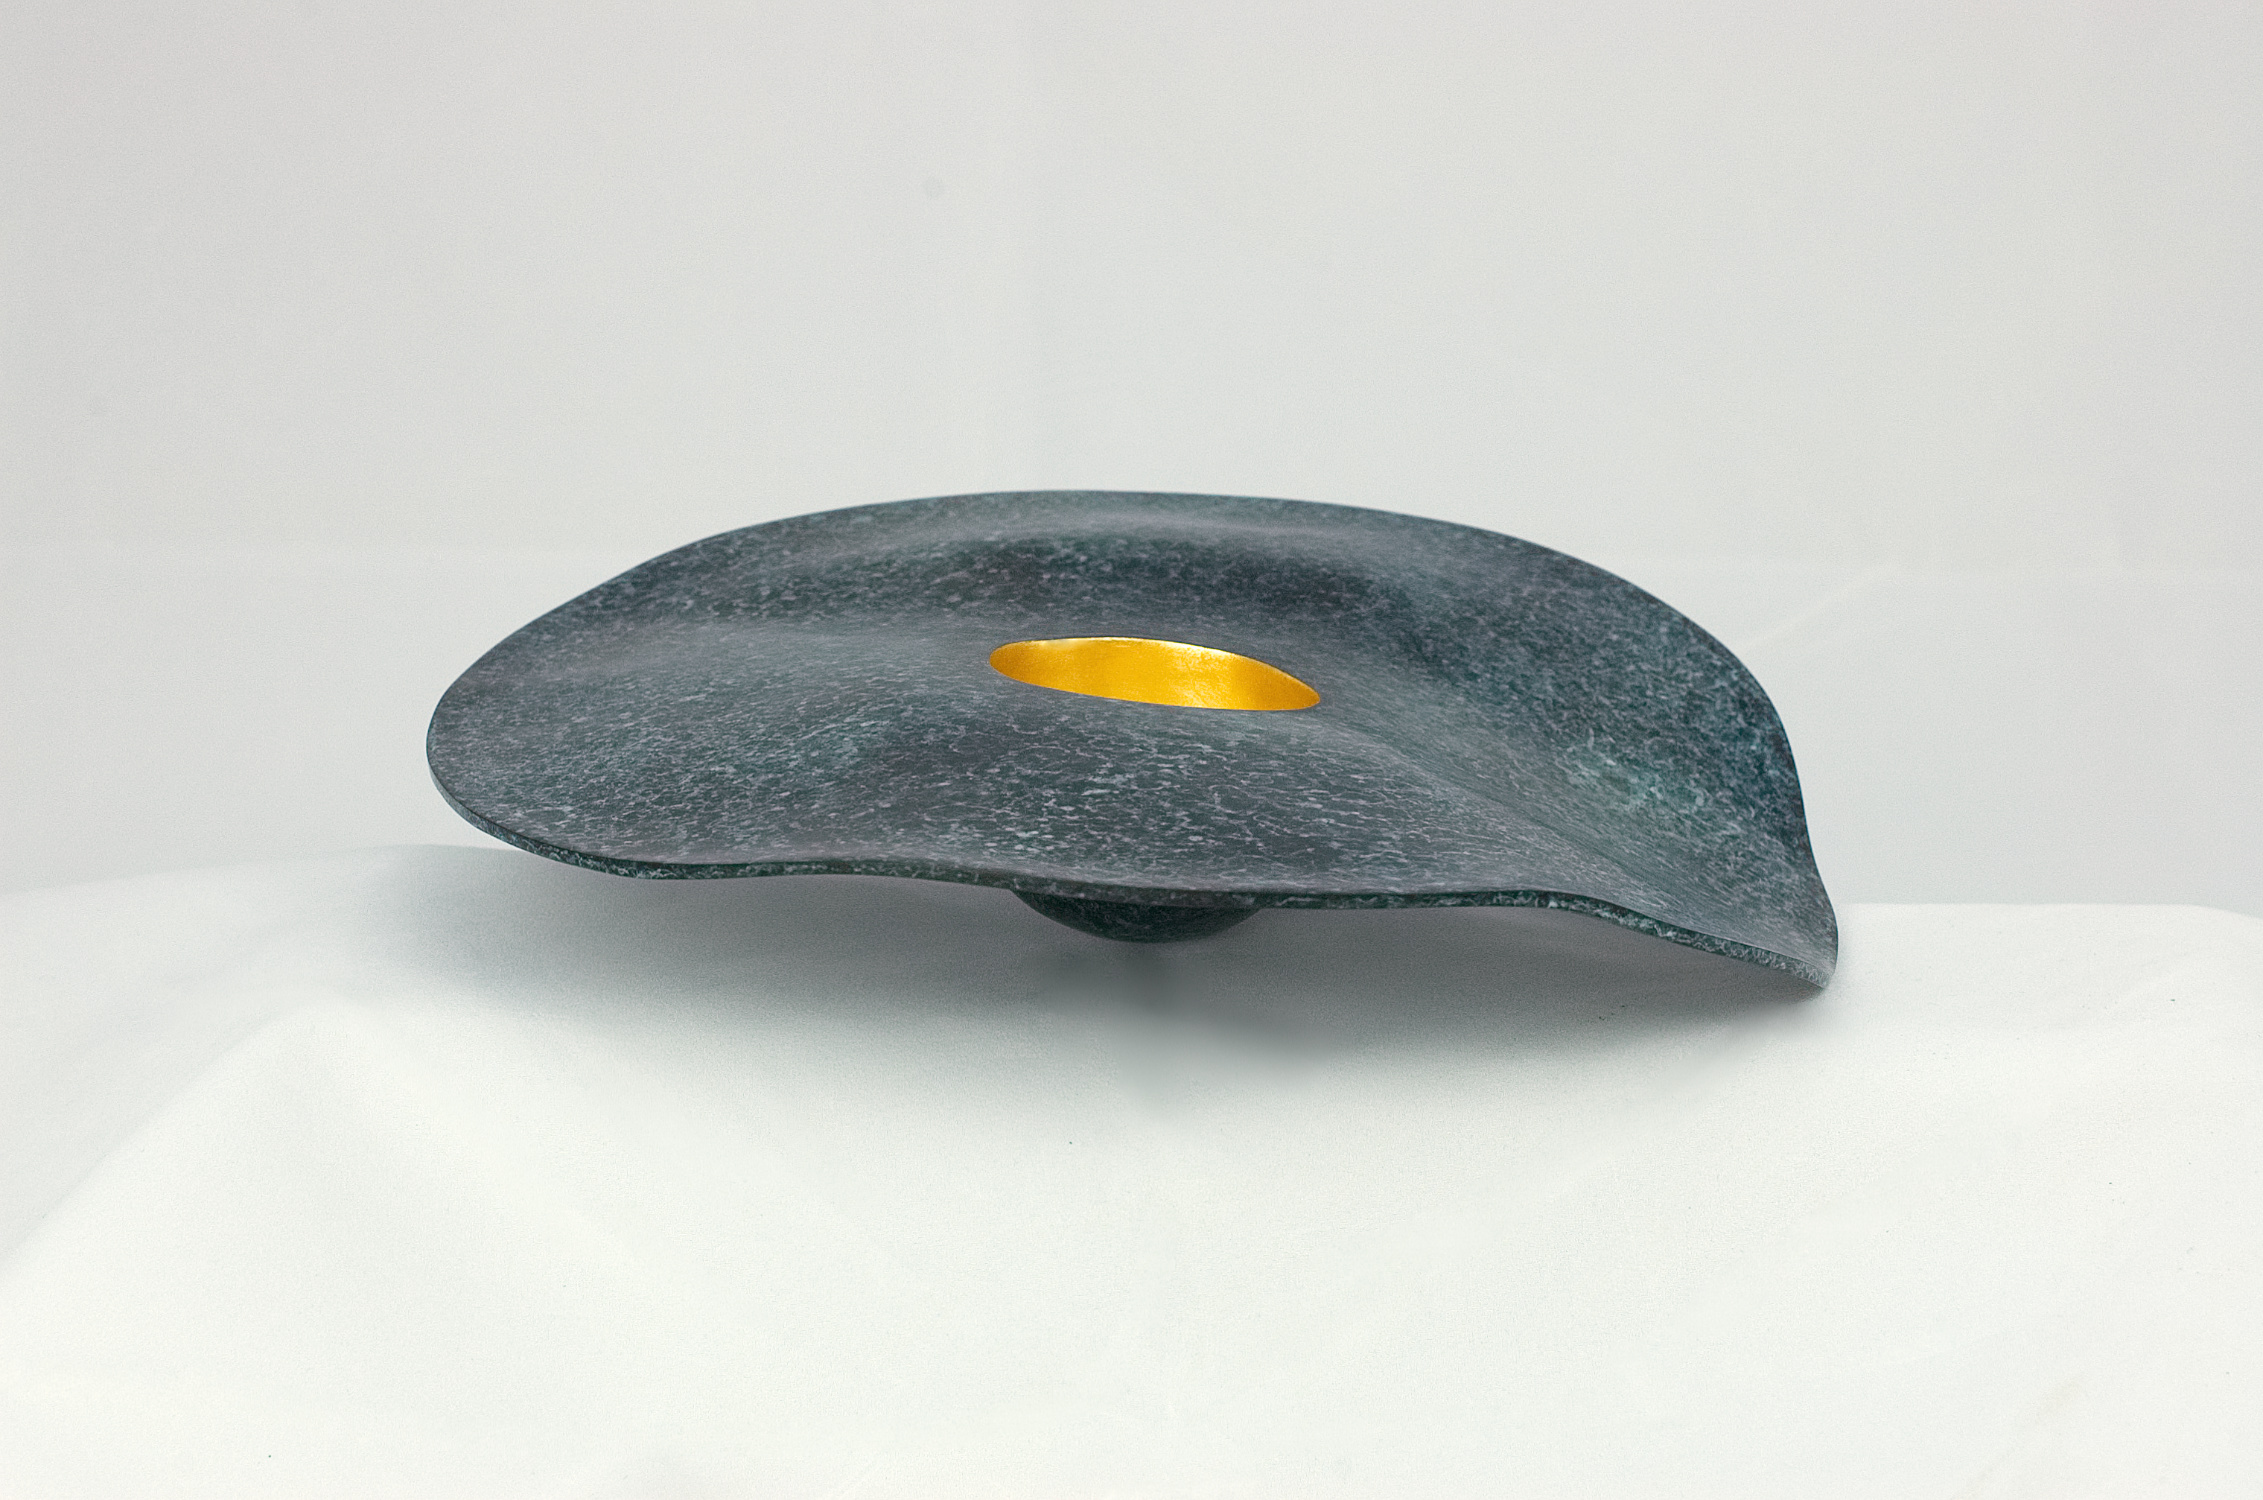 Modern sculpture in bronze. Wide rimmed bowl with the inside of the bowl gilded in 23.5 carat gold. 27 x 5 cms. 2018. One of an edition of 8.